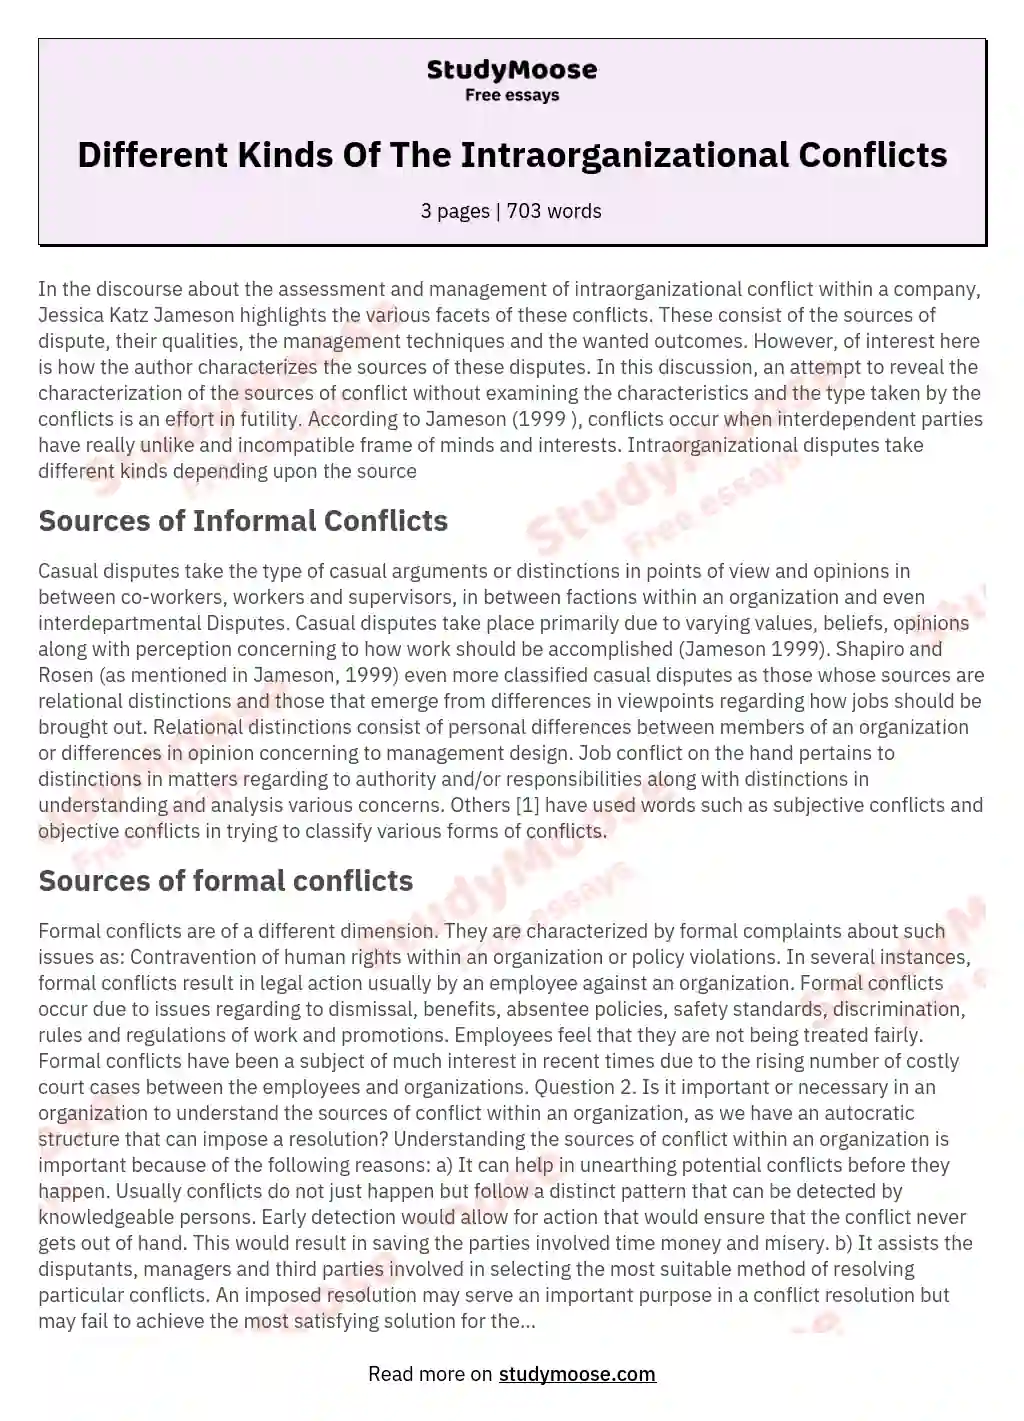 Different Kinds Of The Intraorganizational Conflicts essay